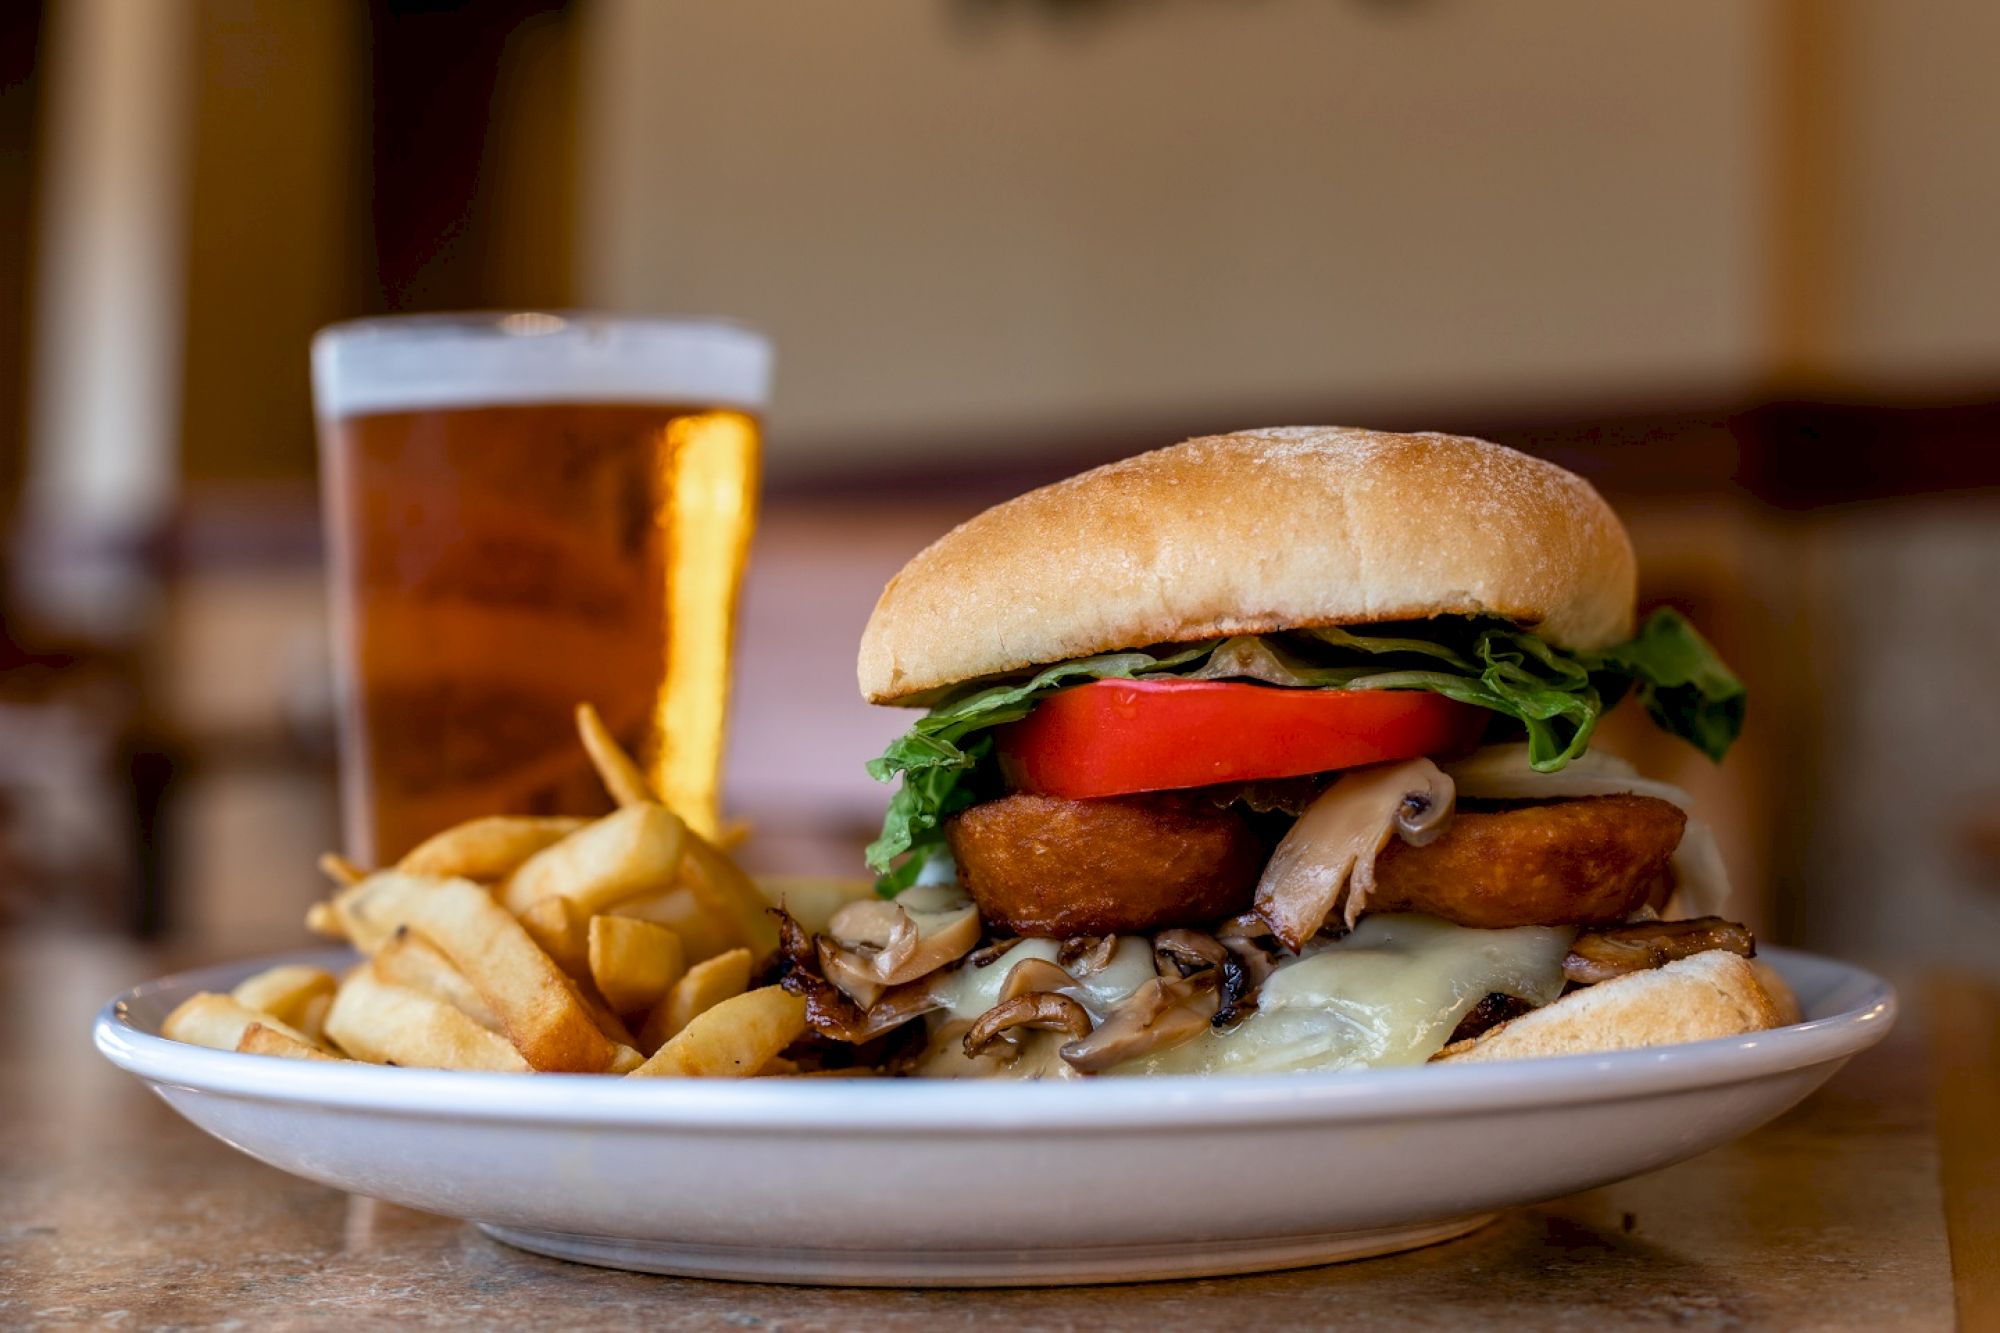 A delicious burger with fries and a cold beer are served on a plate against a blurred background.